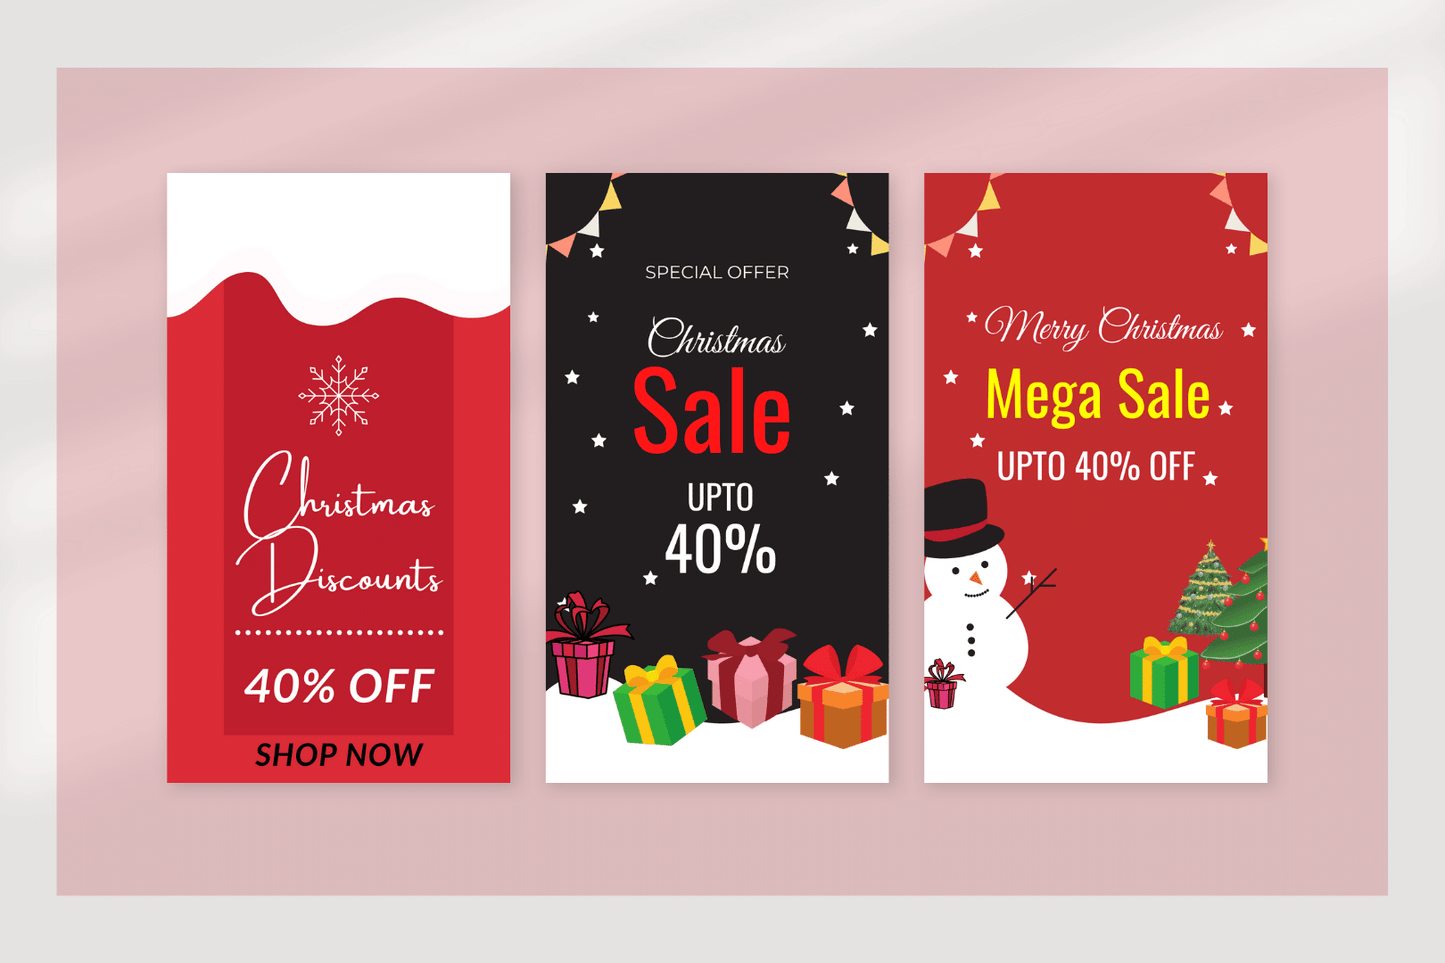 50 Christmas Sales Templates For Stories